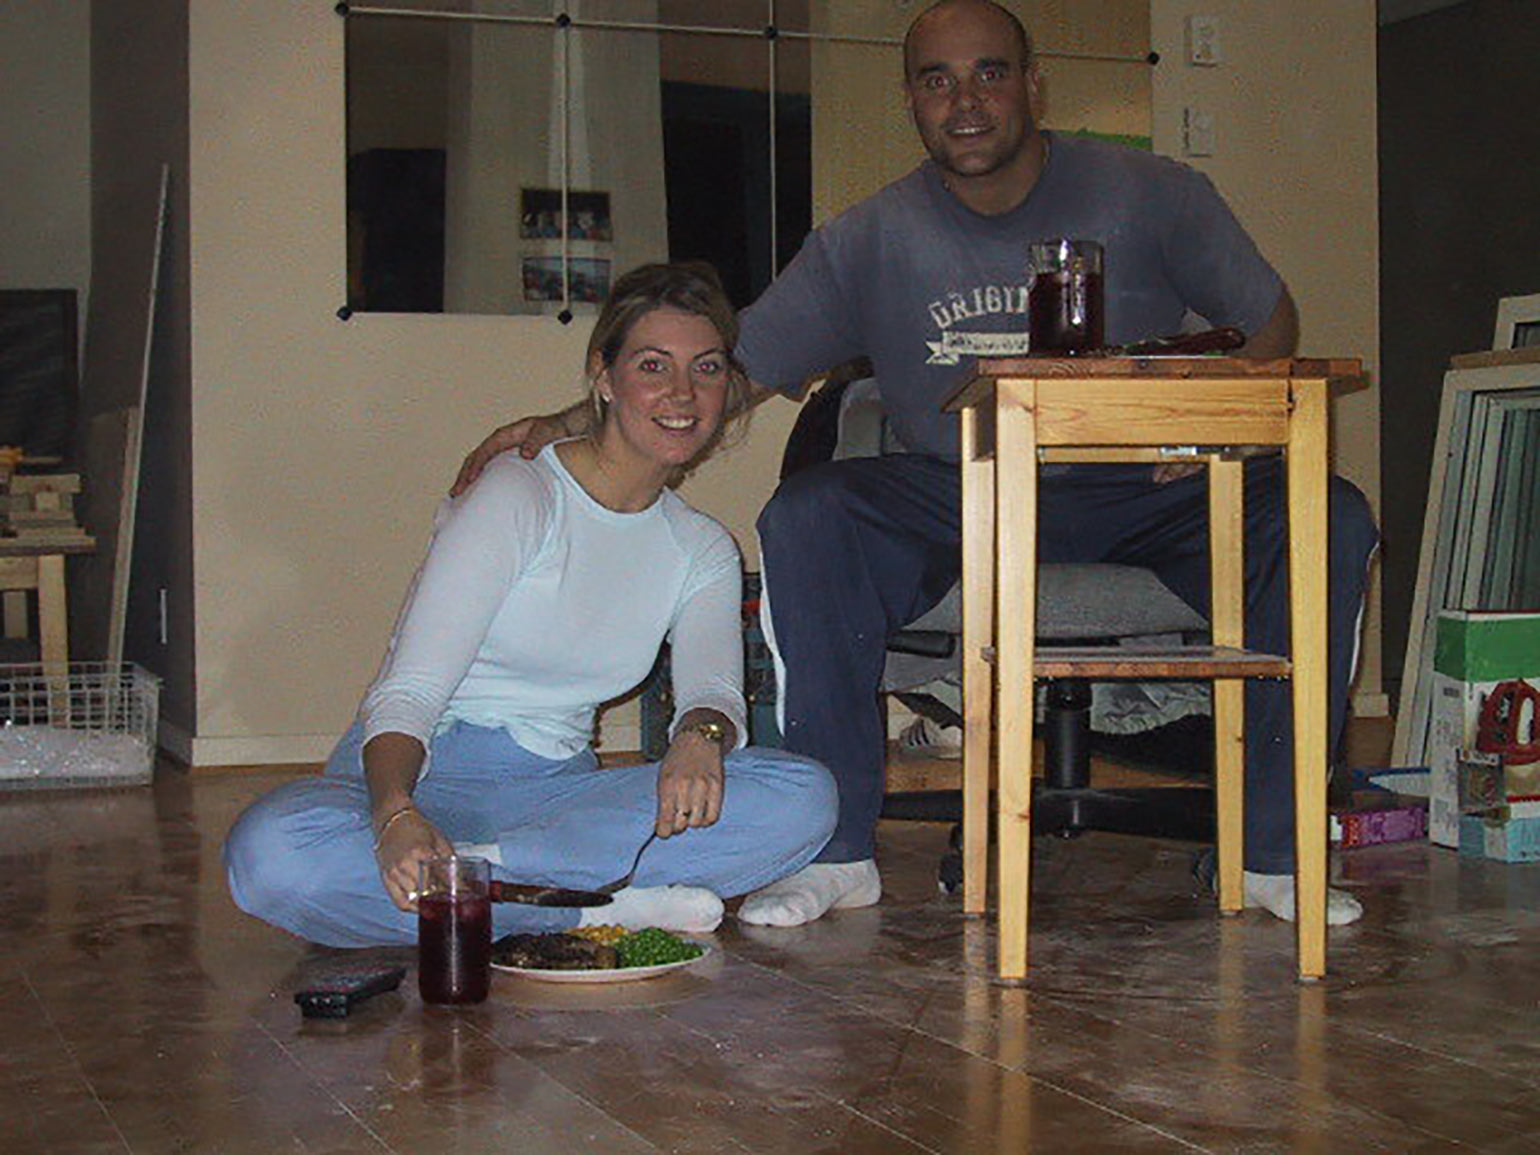 Bryan and Sarah eating in the house